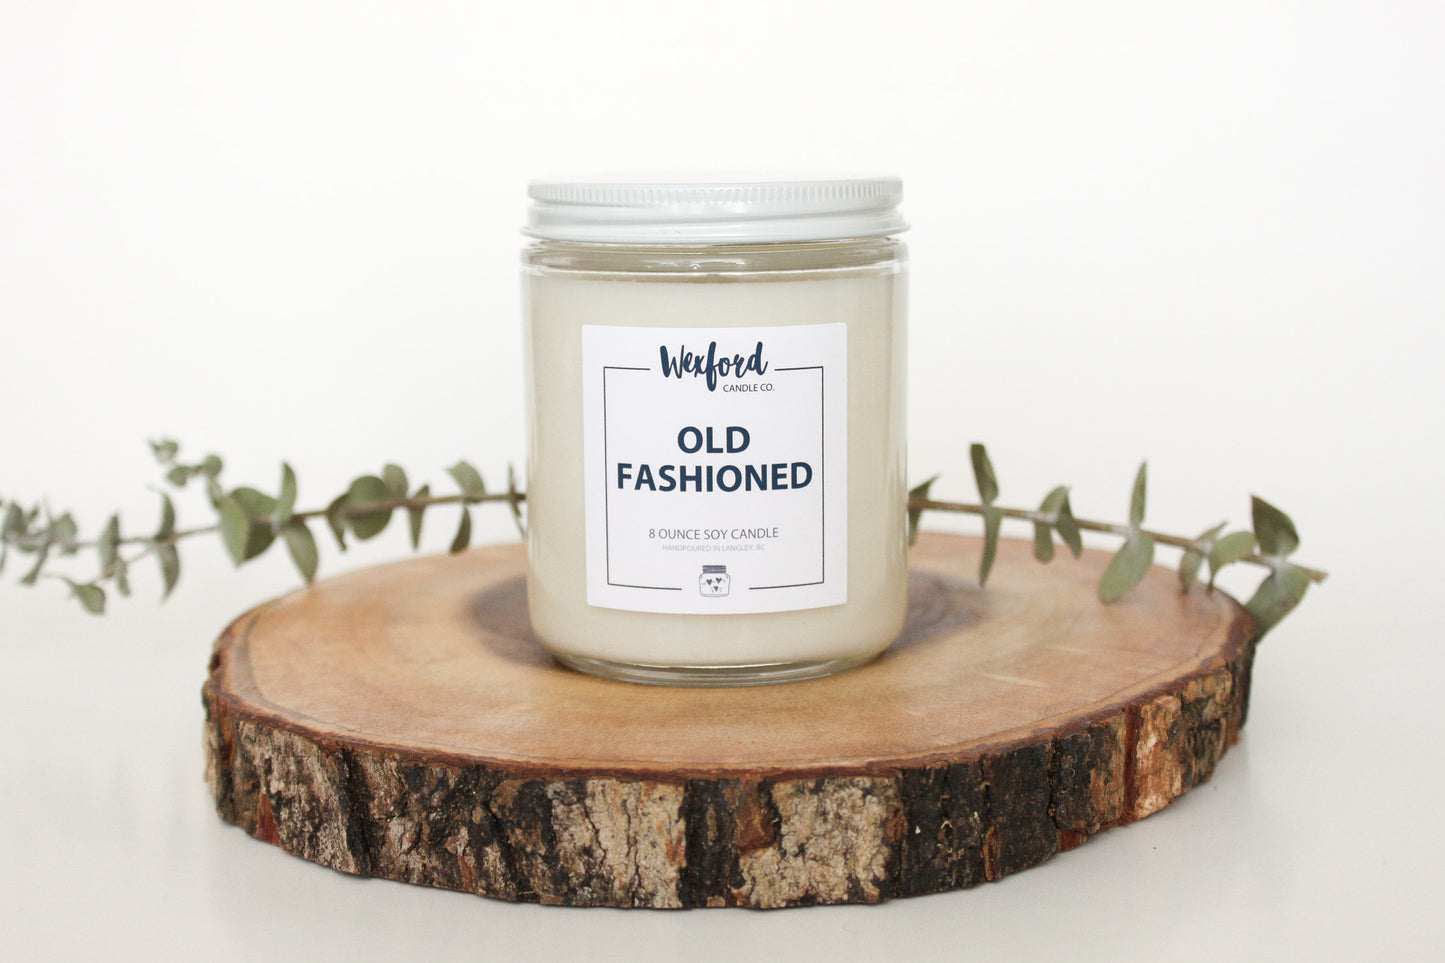 Old Fashioned Soy Candle - Wexford Candle Co.